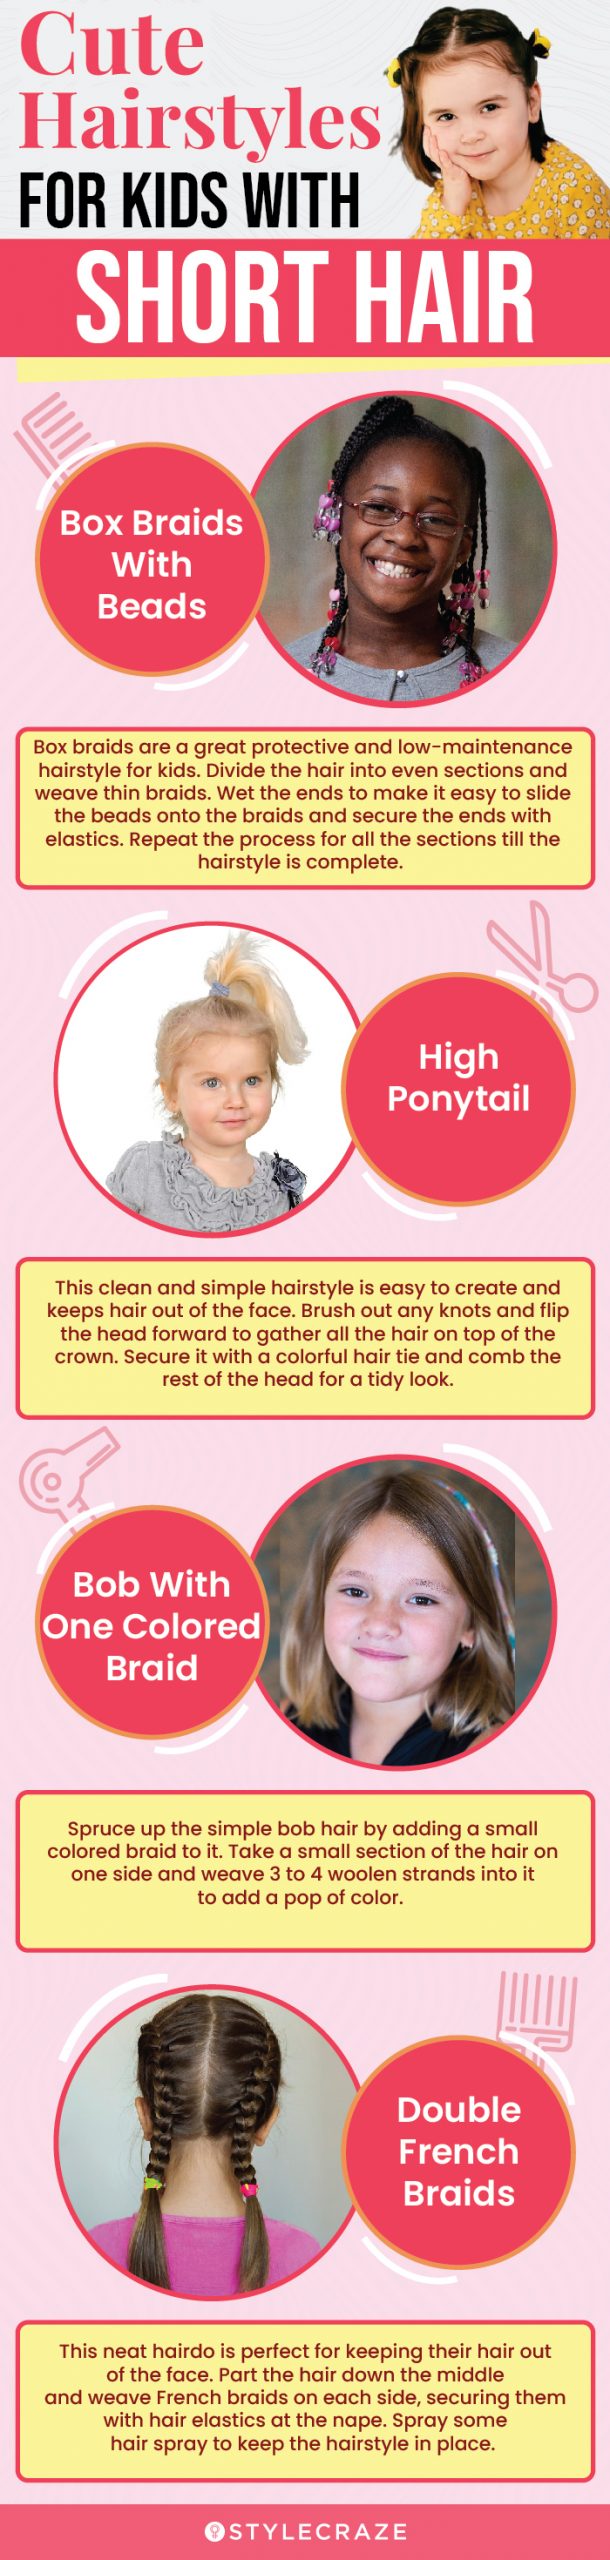 cute hairstyles for kids with short hair (infographic)